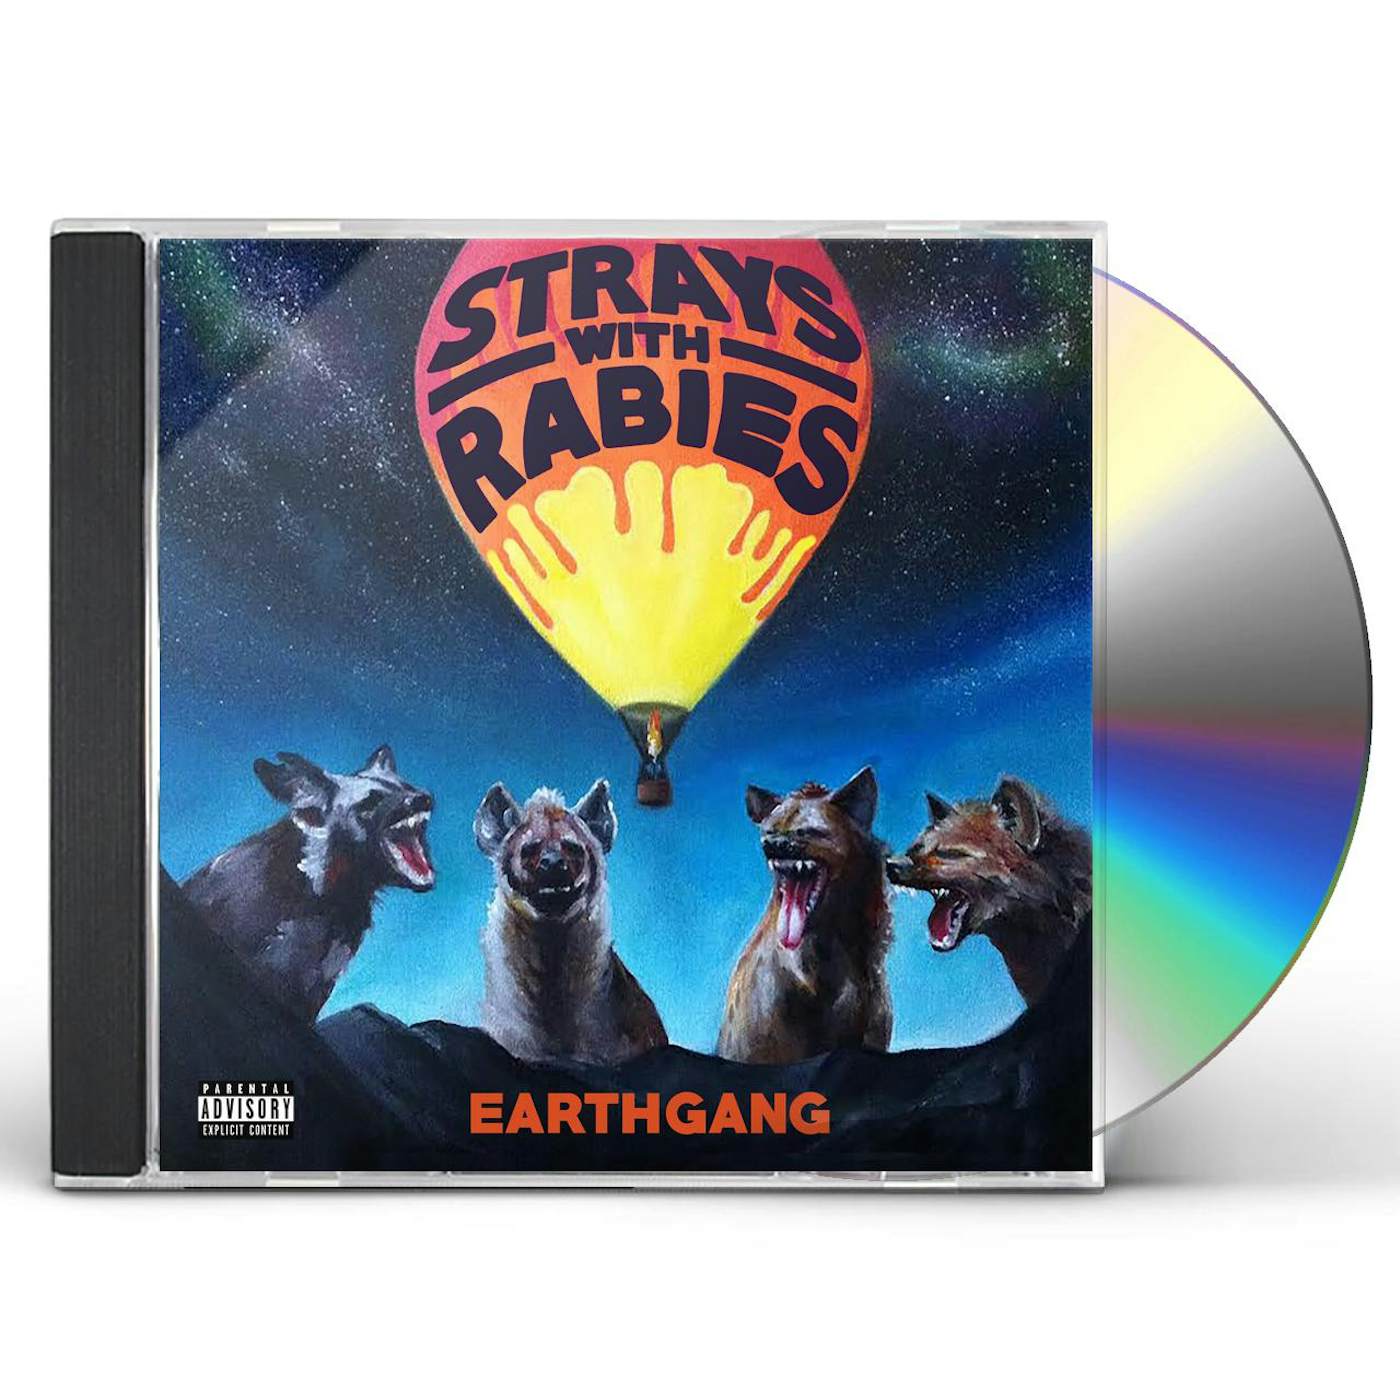 EARTHGANG STRAYS WITH RABIES CD